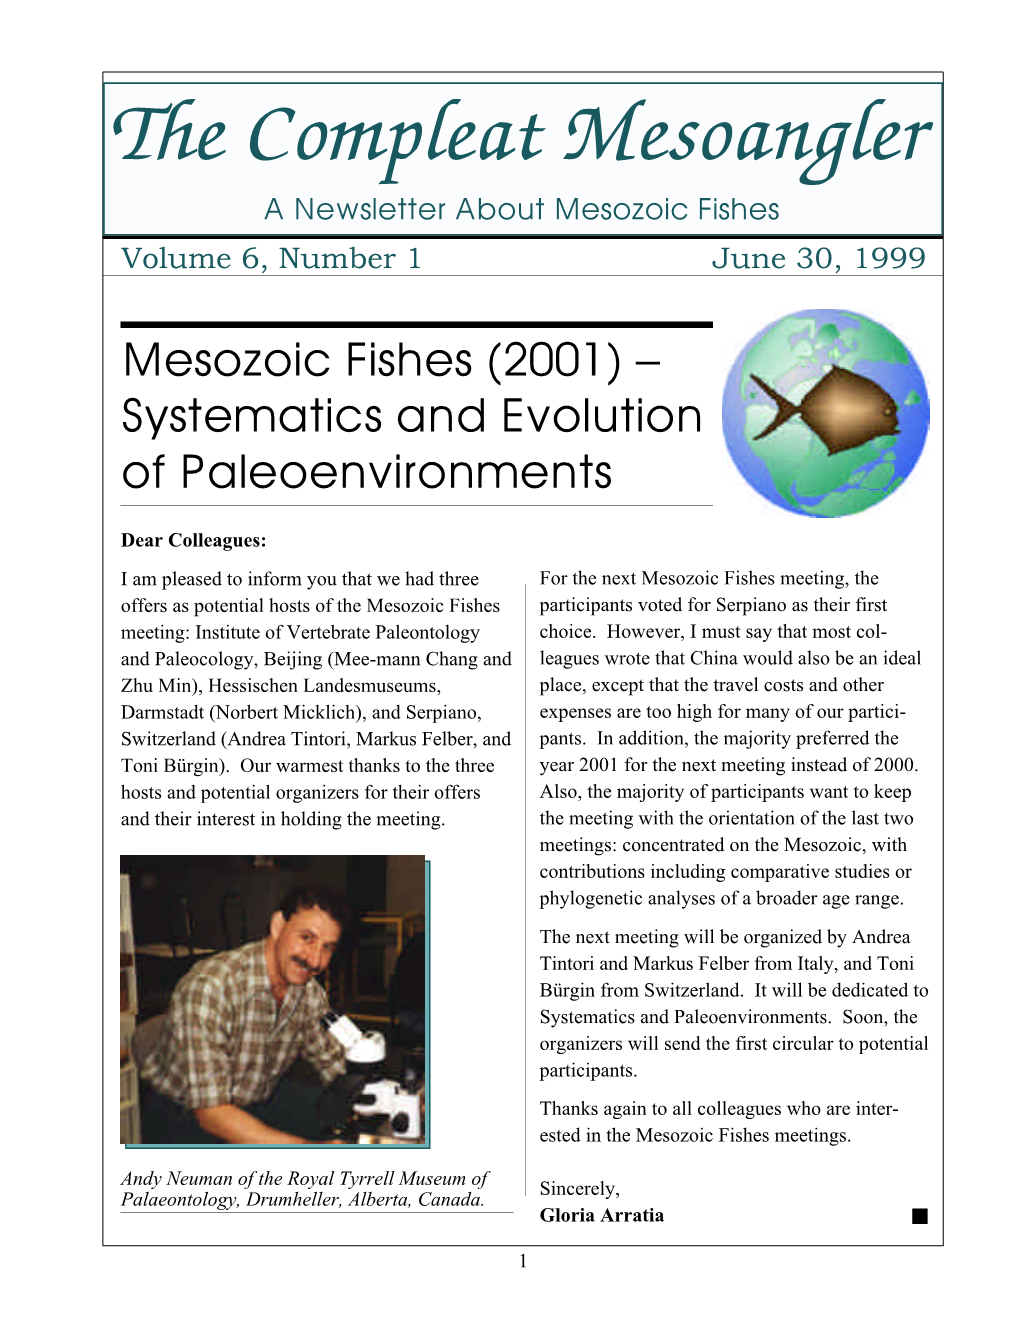 The Compleat Mesoangler a Newsletter About Mesozoic Fishes Volume 6, Number 1 June 30, 1999